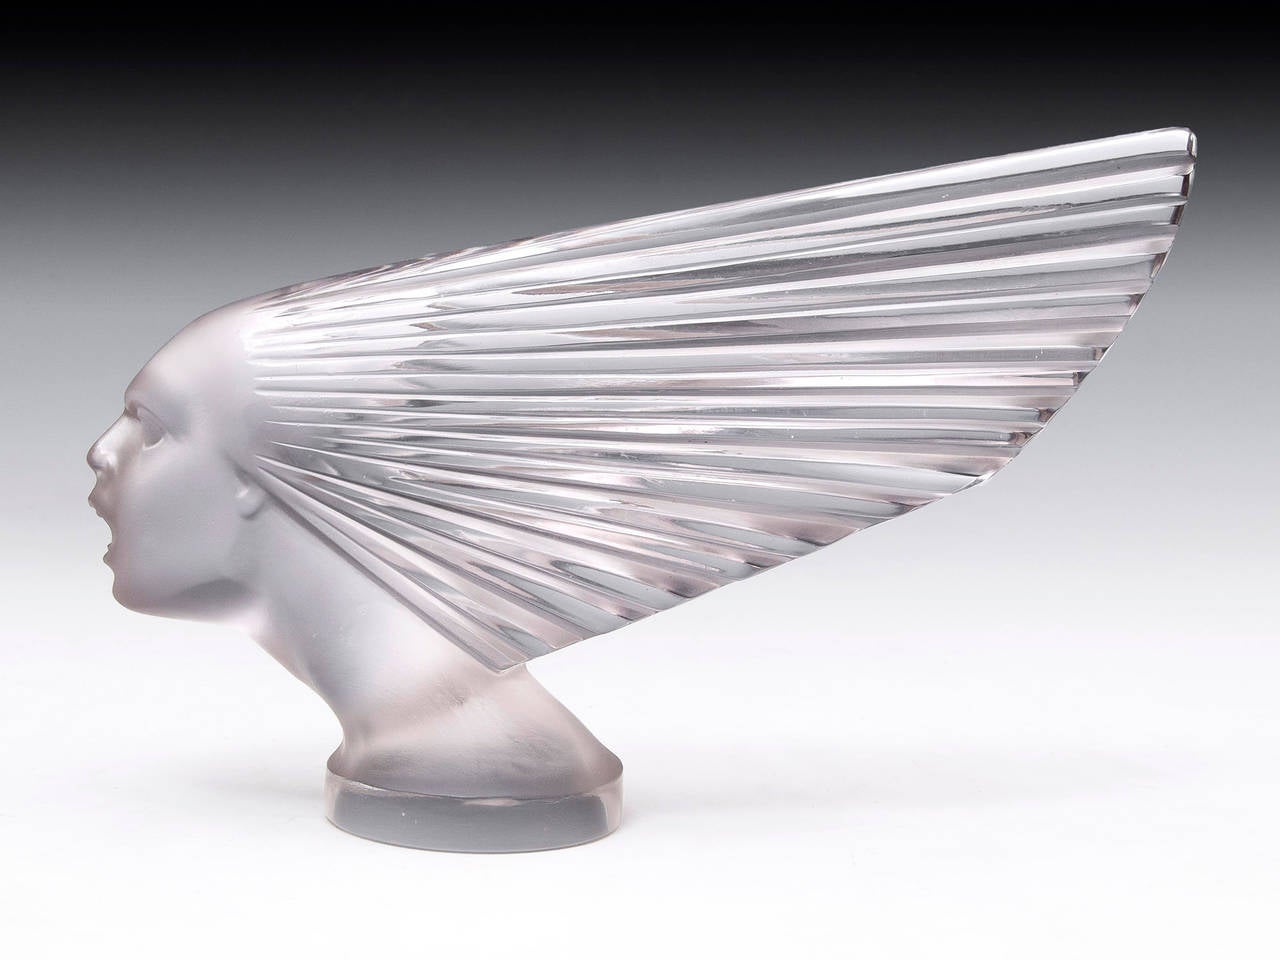 A Rene Lalique 'victoire' or 'Spirit of the wind' car mascot, a figure head with strong art deco lines featuring clear and frosted glass. This Is a genuine R. Lalique Mascot, its has had professional restoration as there was damage to the hair, nose